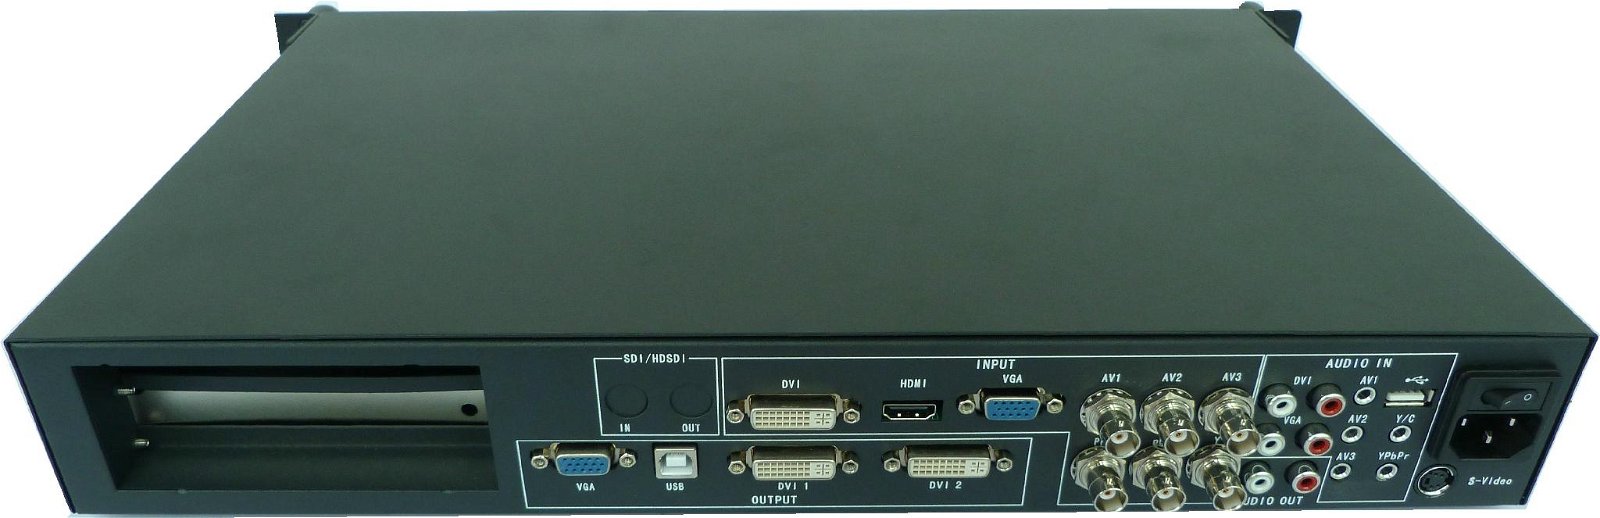 LVP838S LED Video Processor for TV or fashion show broadcast 3